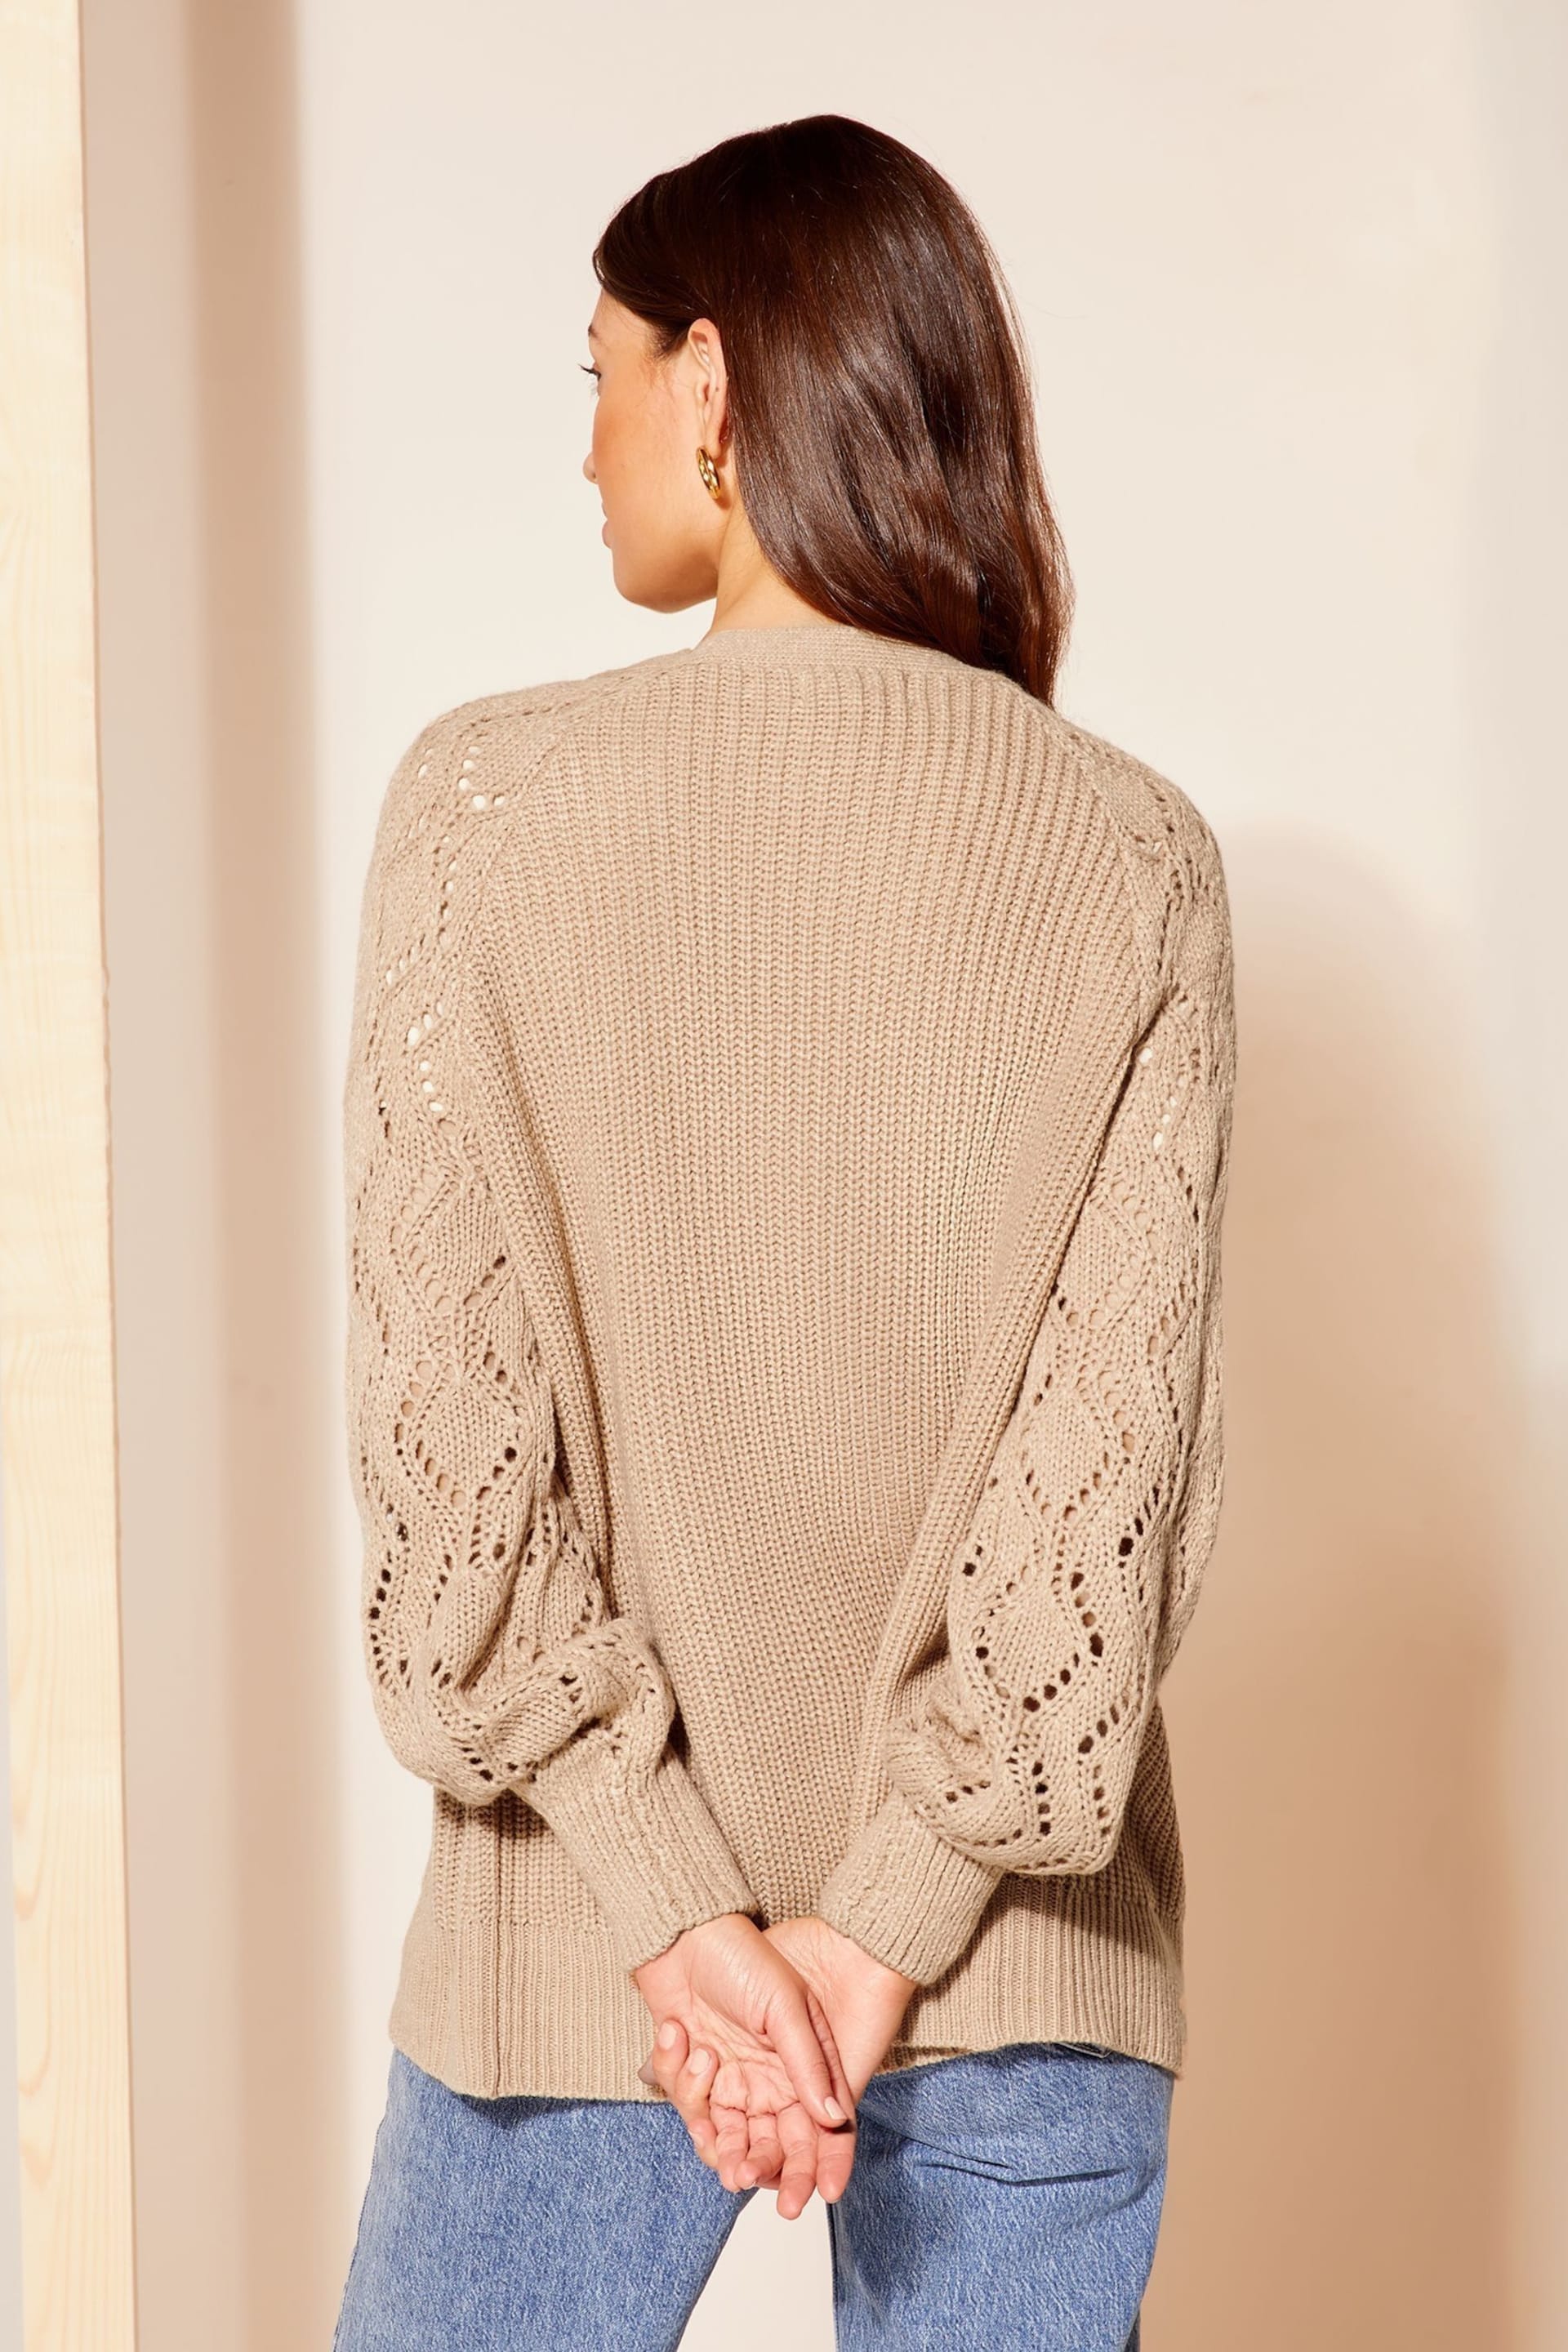 Friends Like These Camel Stitch Sleeve Crochet Cardigan - Image 4 of 4